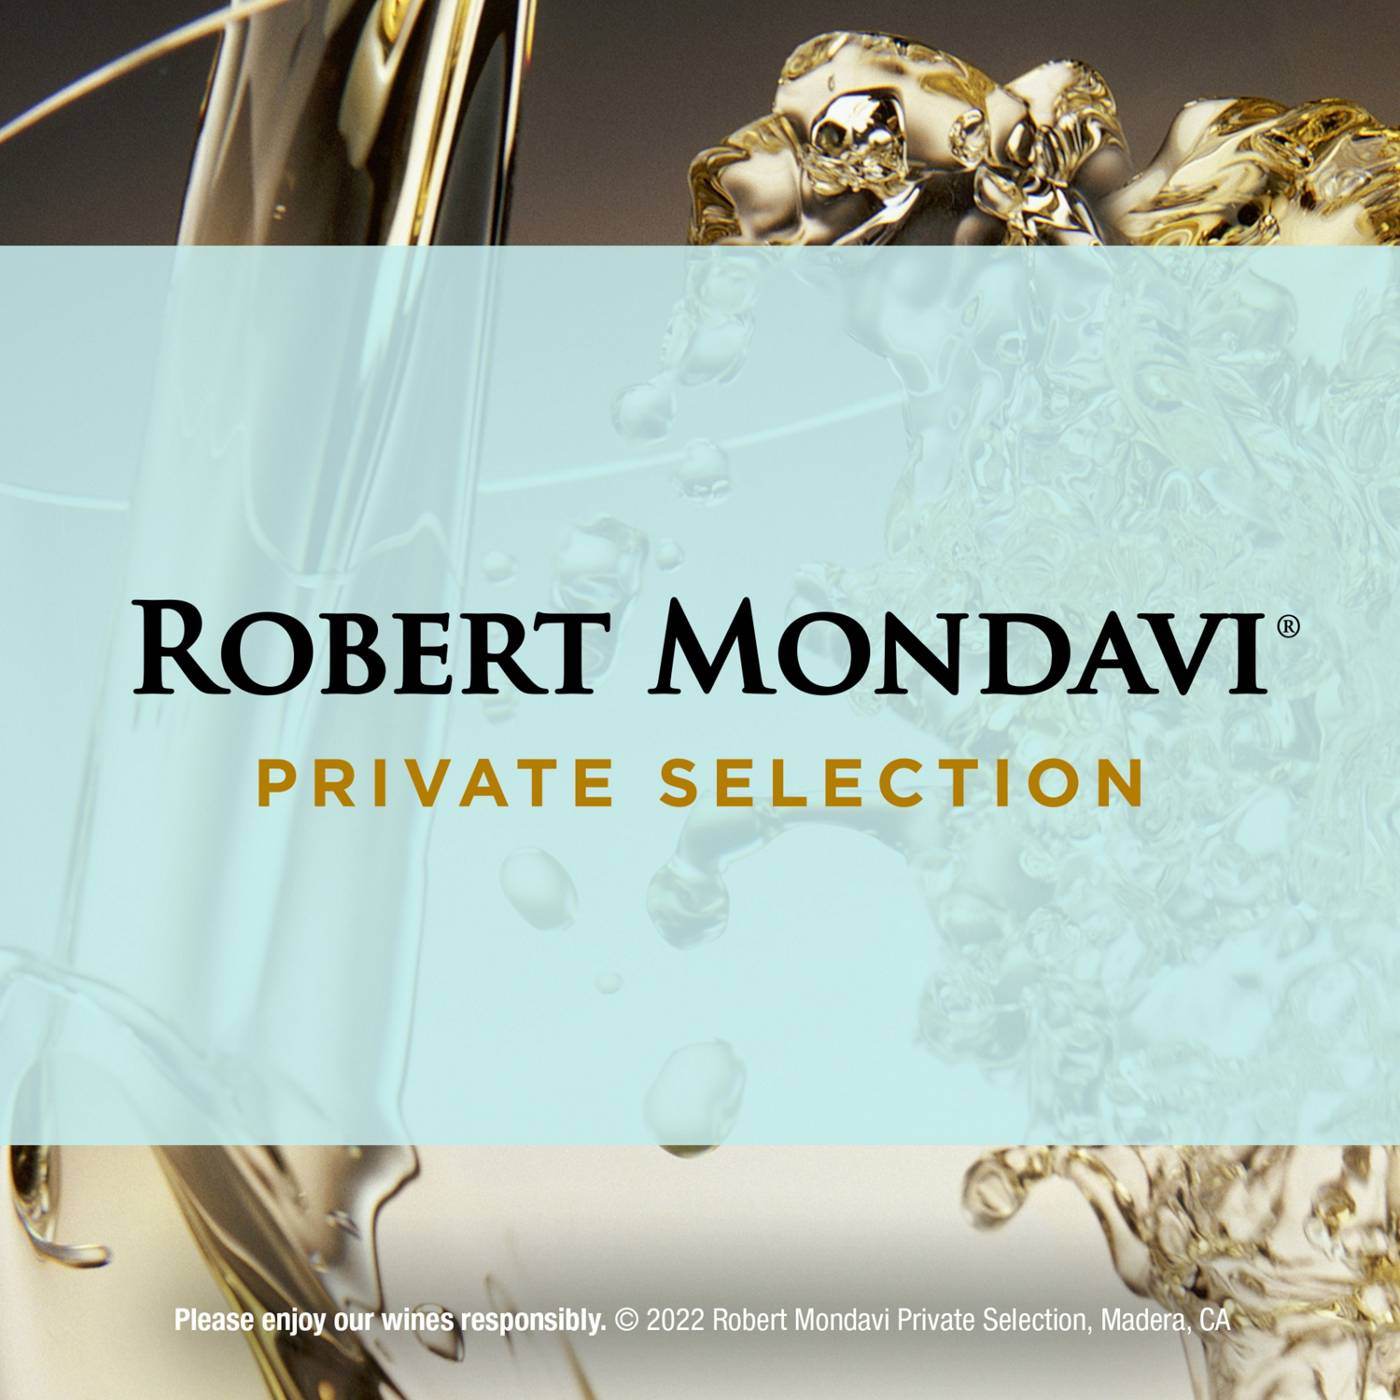 Robert Mondavi Private Selection Selection Lightly Bubbled Pinot Grigio White Wine 750 mL Bottle; image 8 of 11